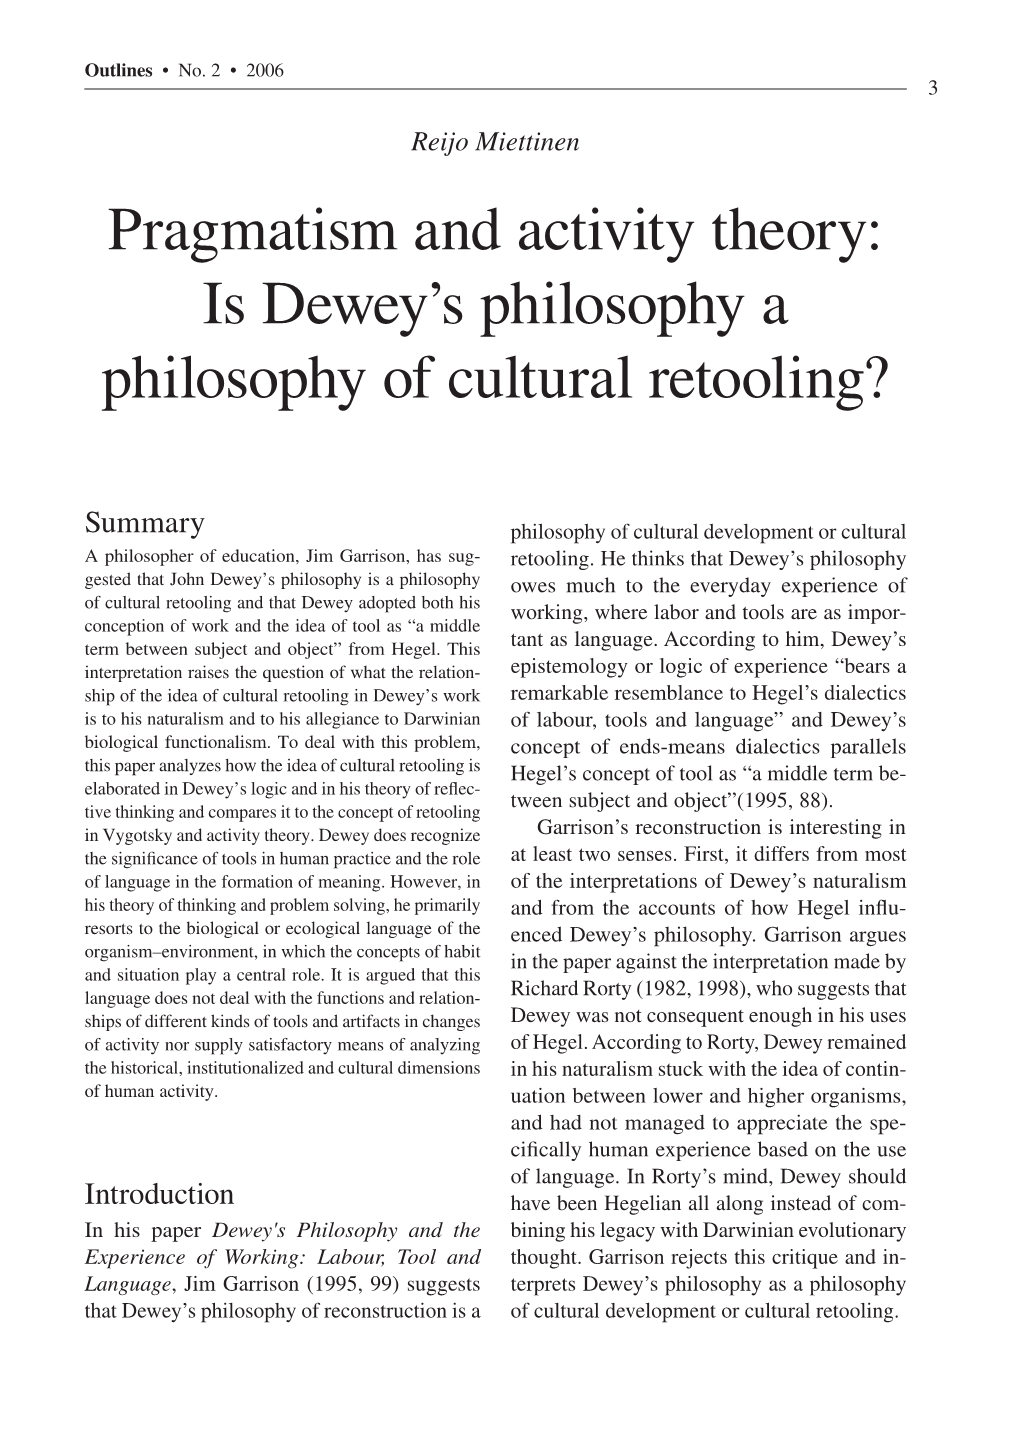 Pragmatism and Activity Theory: Is Dewey's Philosophy A